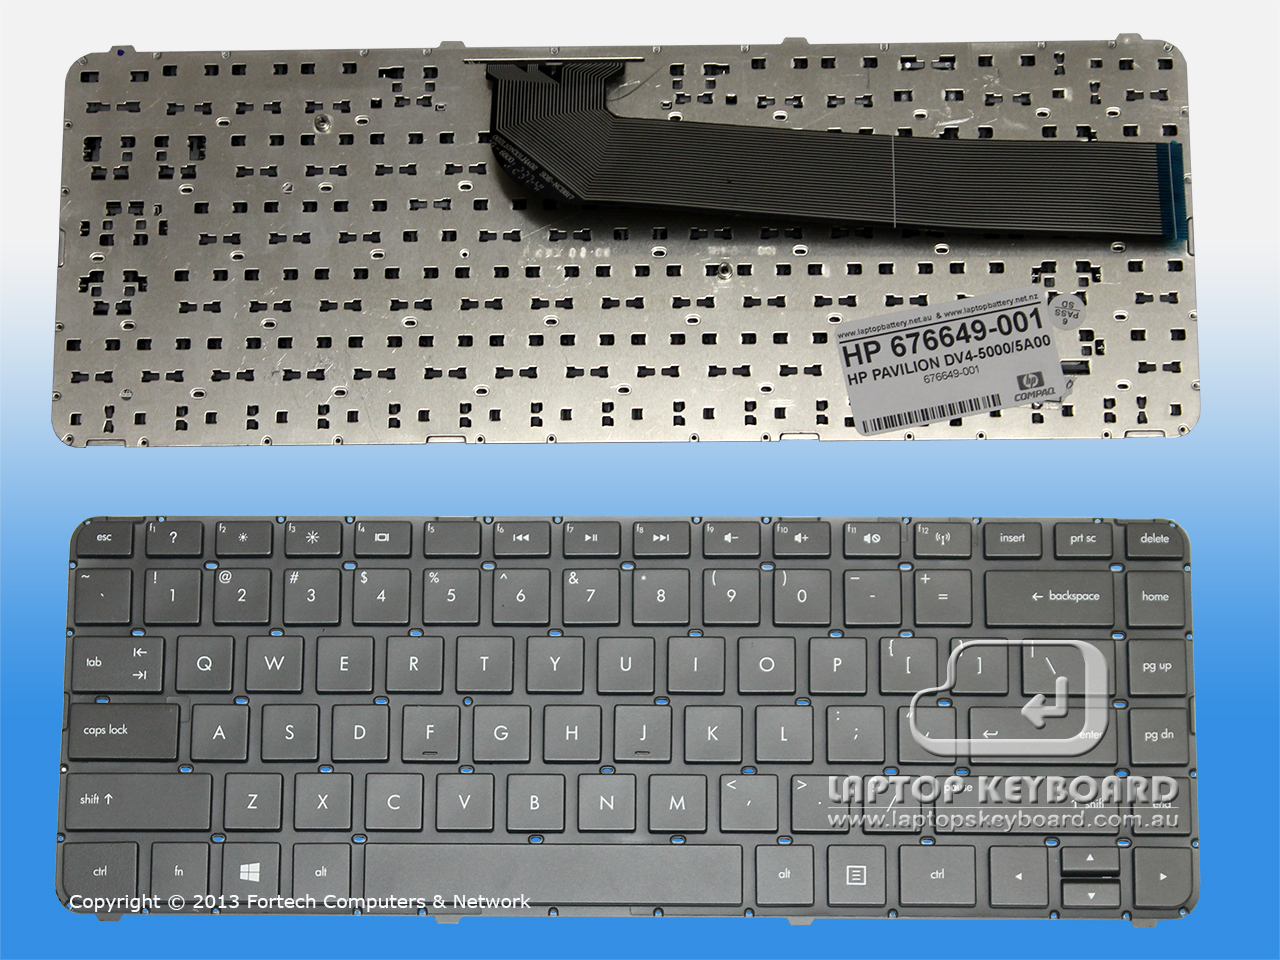 HP PAVILION DV4-5000 US REPLACE KEYBOARD 676649-001 - Click Image to Close